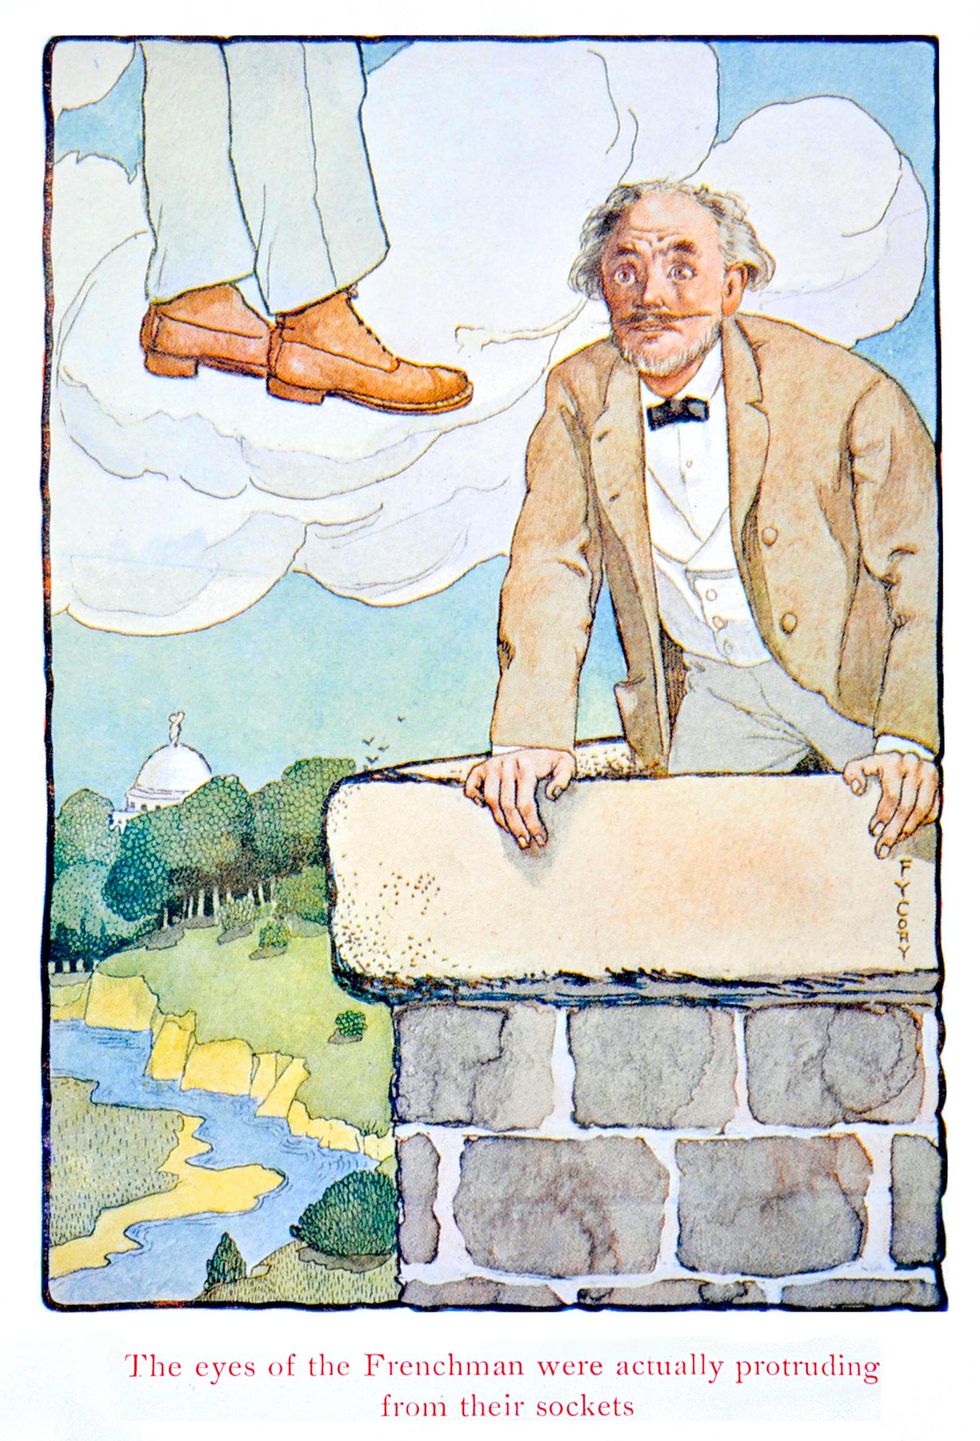 Color illustration from the book shows an older man with a thin mustache gripping the edge of a cobbled roof. A pair of pants and shoes at the top left indicate a person in the air. The text says \u201cThe eyes of the Frenchman were actually protruding from their sockets.\u201d